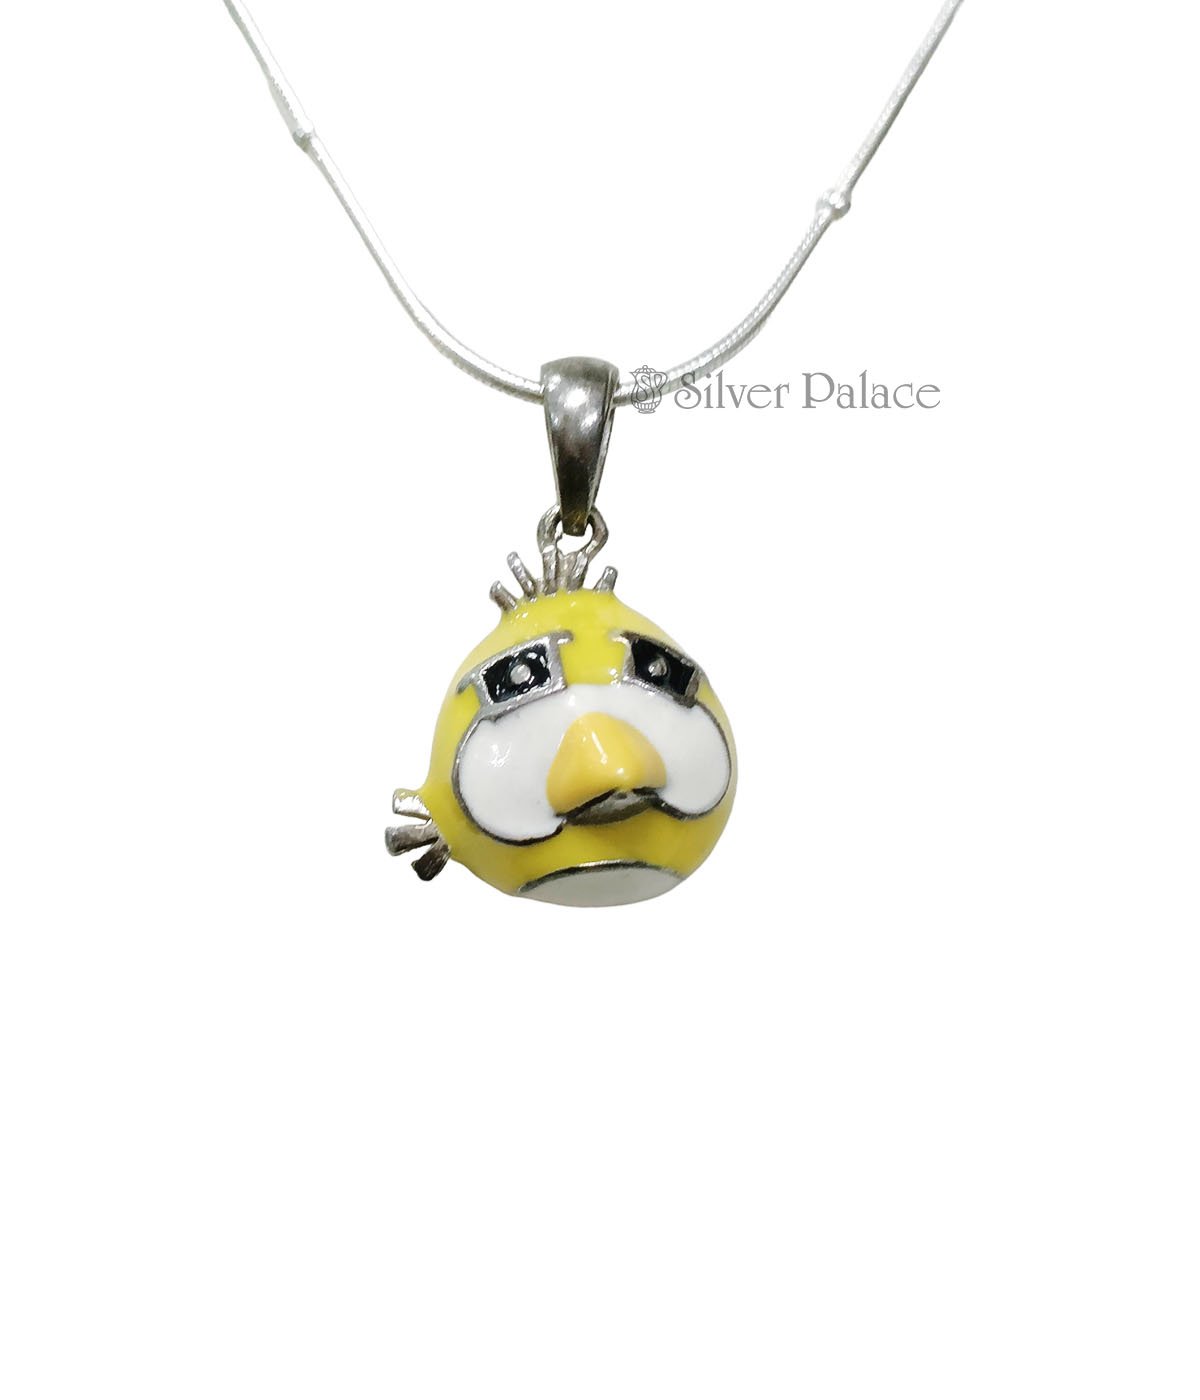 92.STERLING SILVER ANGRY BIRD PENDANT 